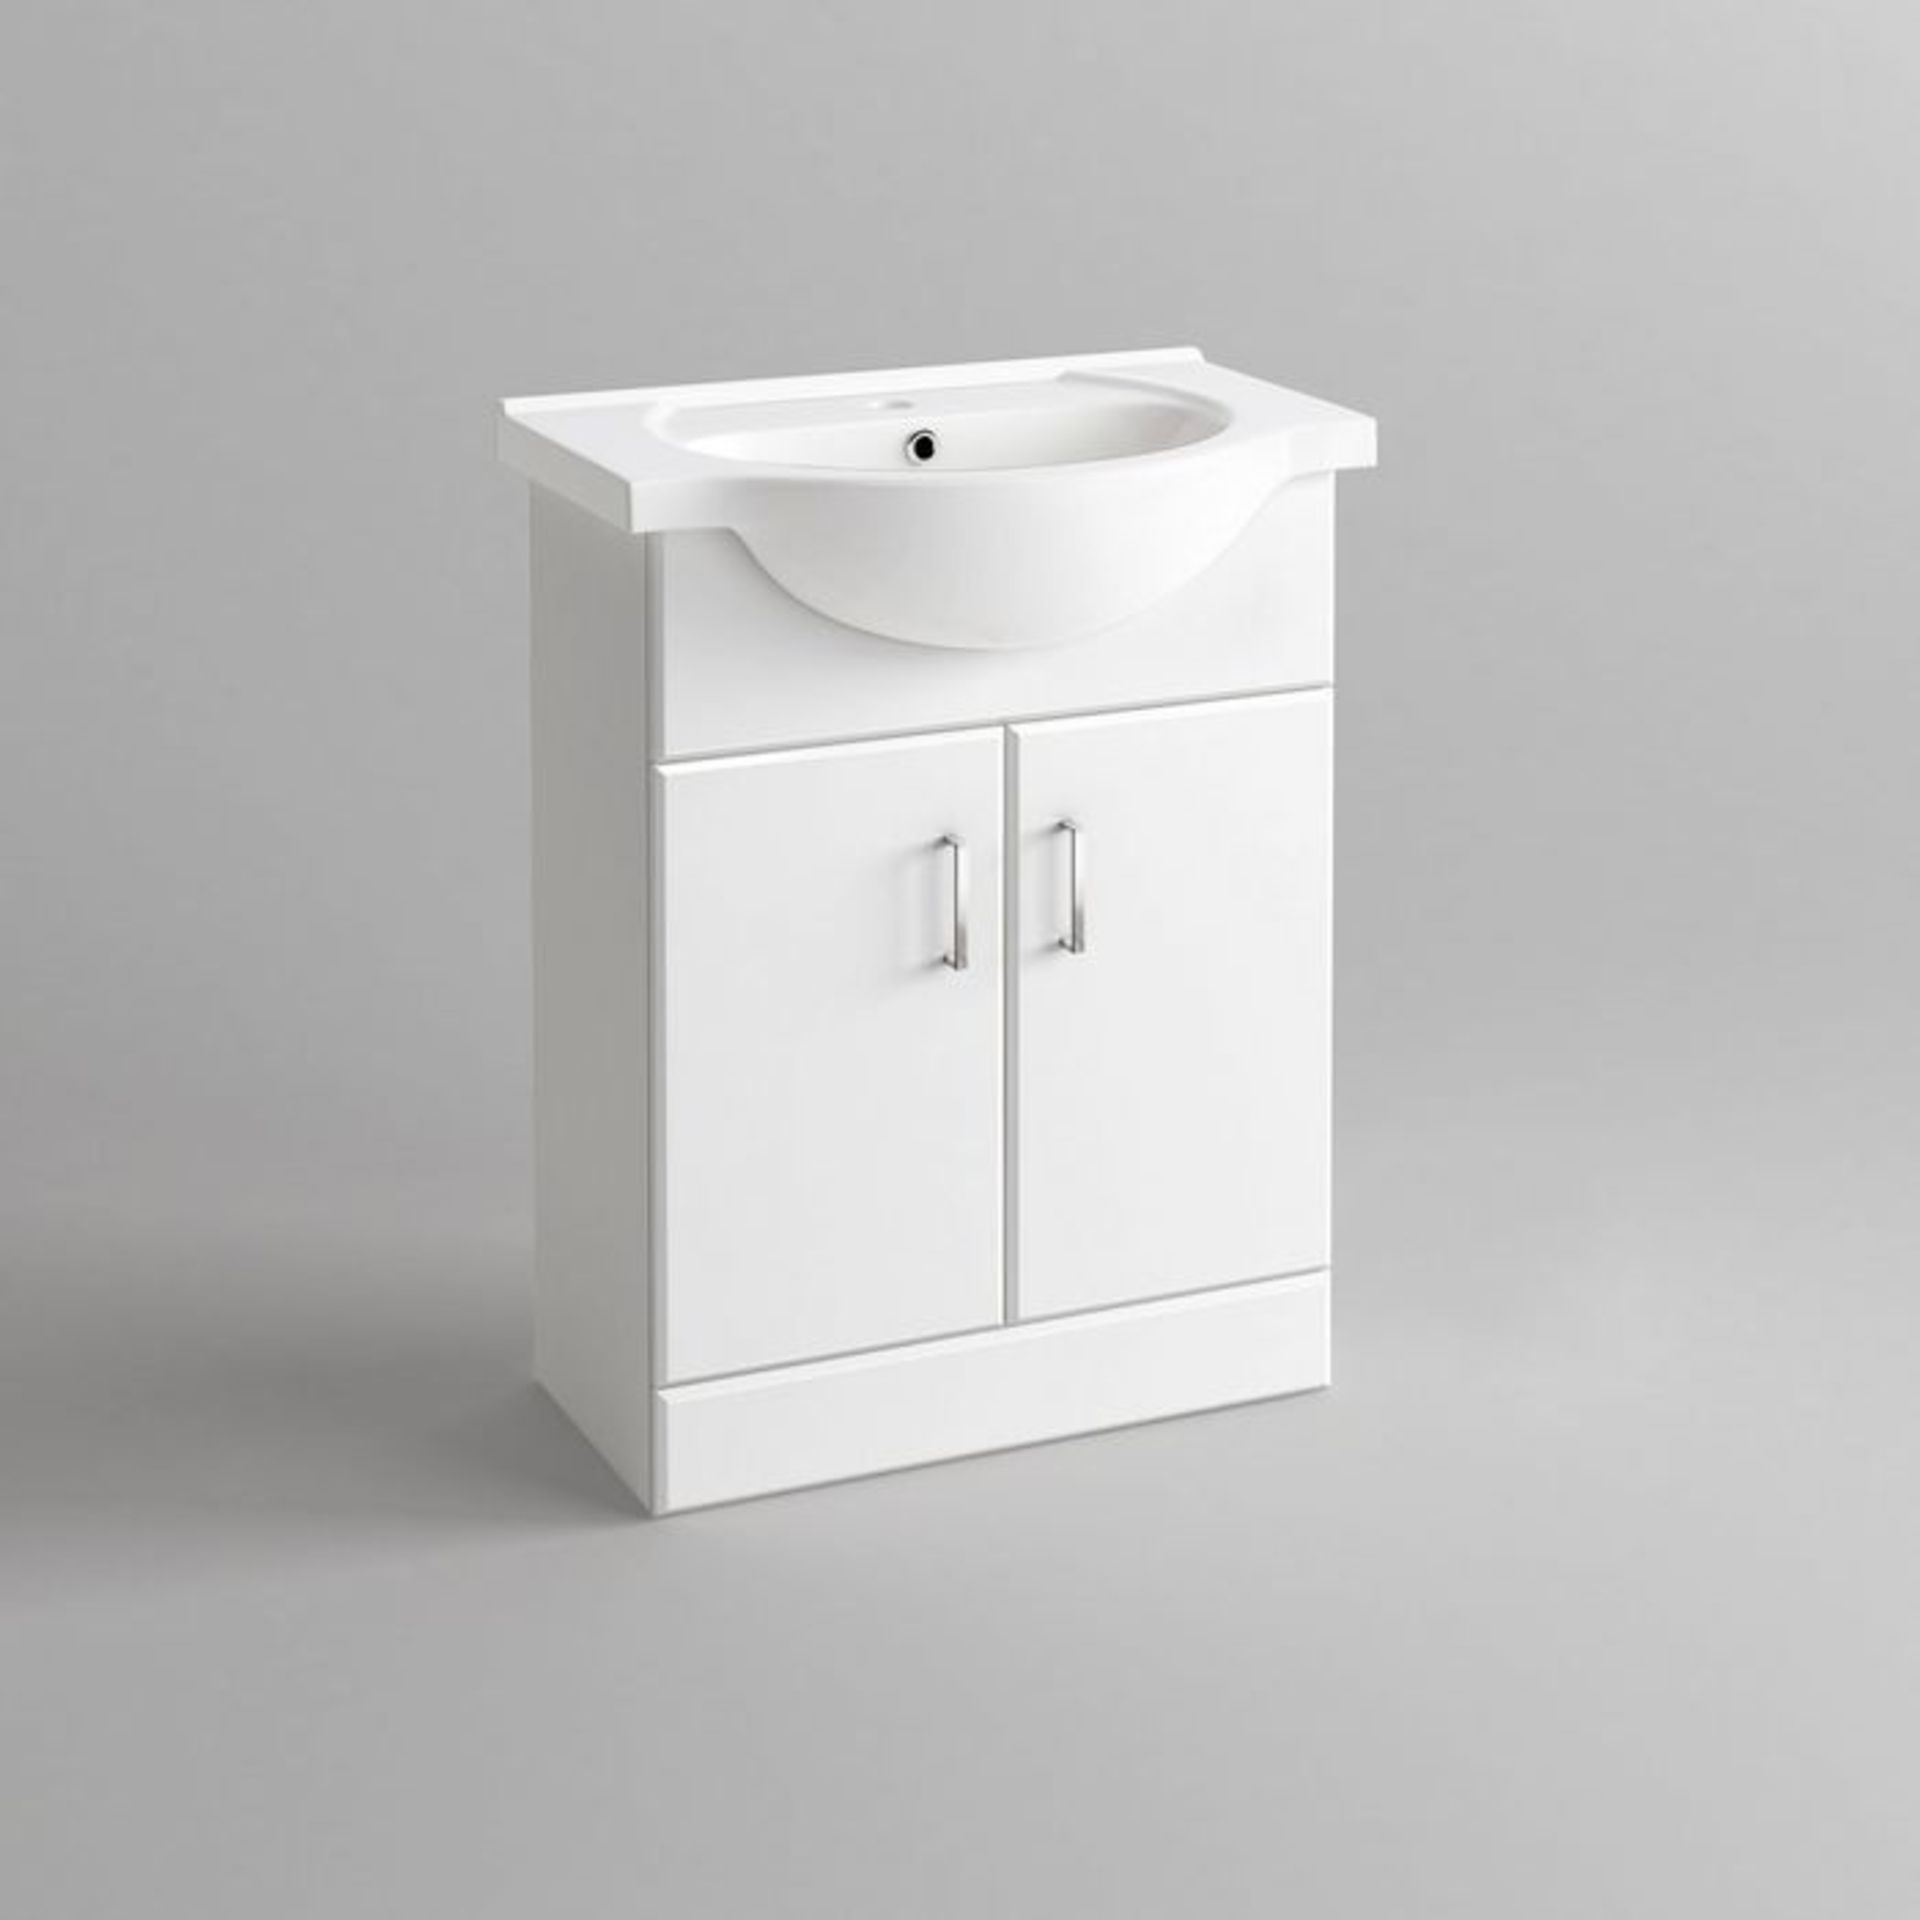 (JF102) 550x300mm Quartz Gloss White Built In Sink Cabinet. RRP £349.99. Comes complete with b... - Image 4 of 4